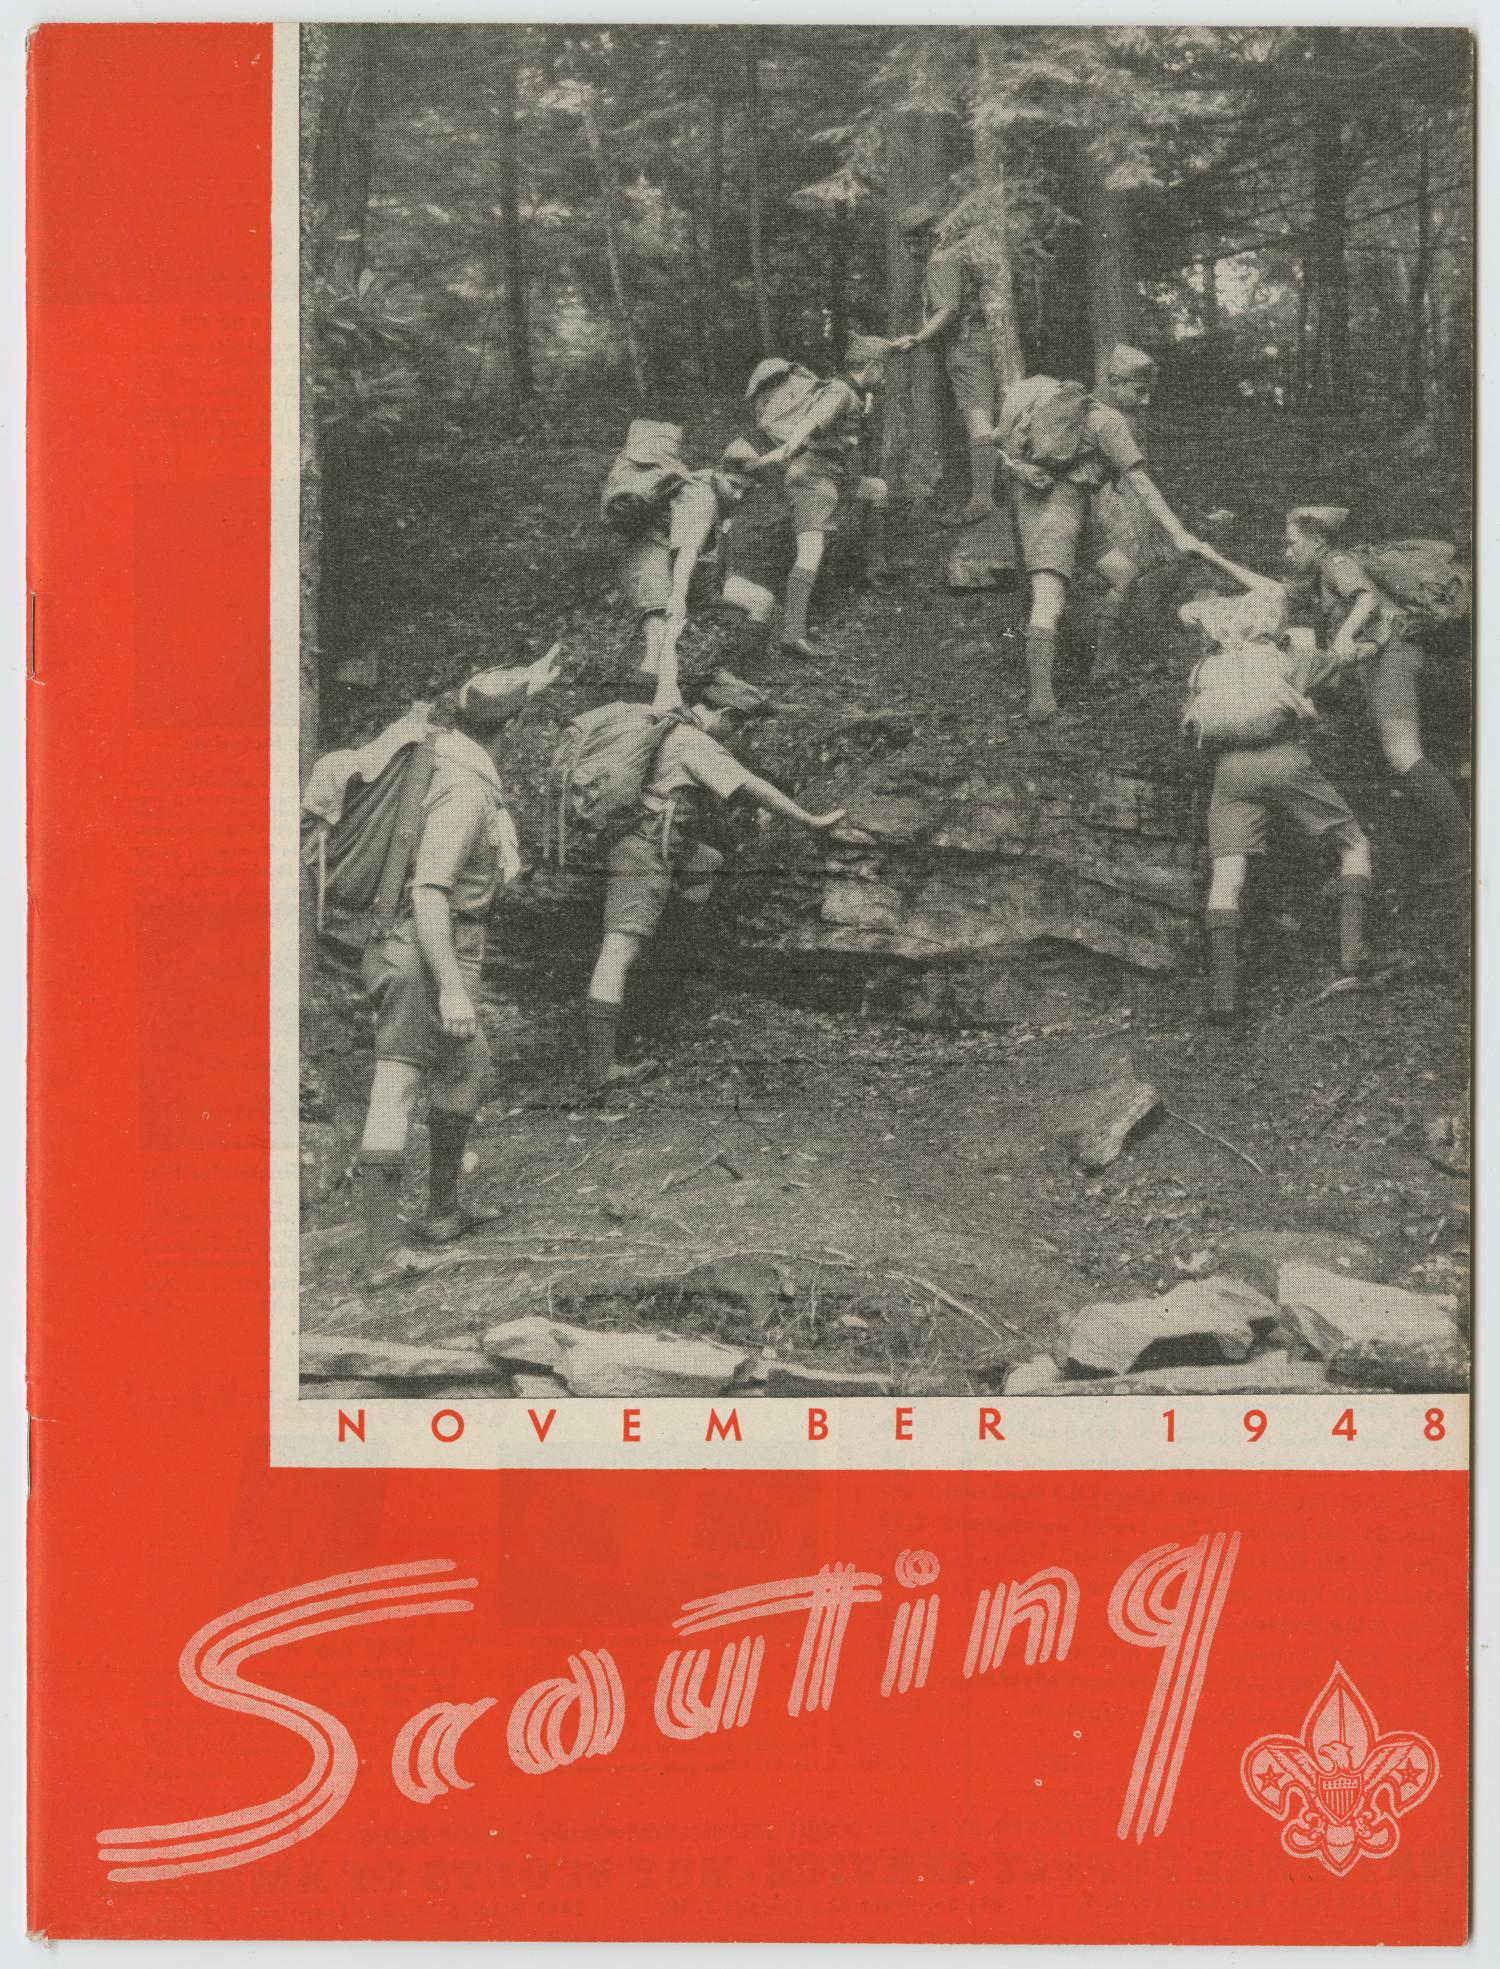 Scouting, Volume 36, Number 9, November 1948
                                                
                                                    Front Cover
                                                